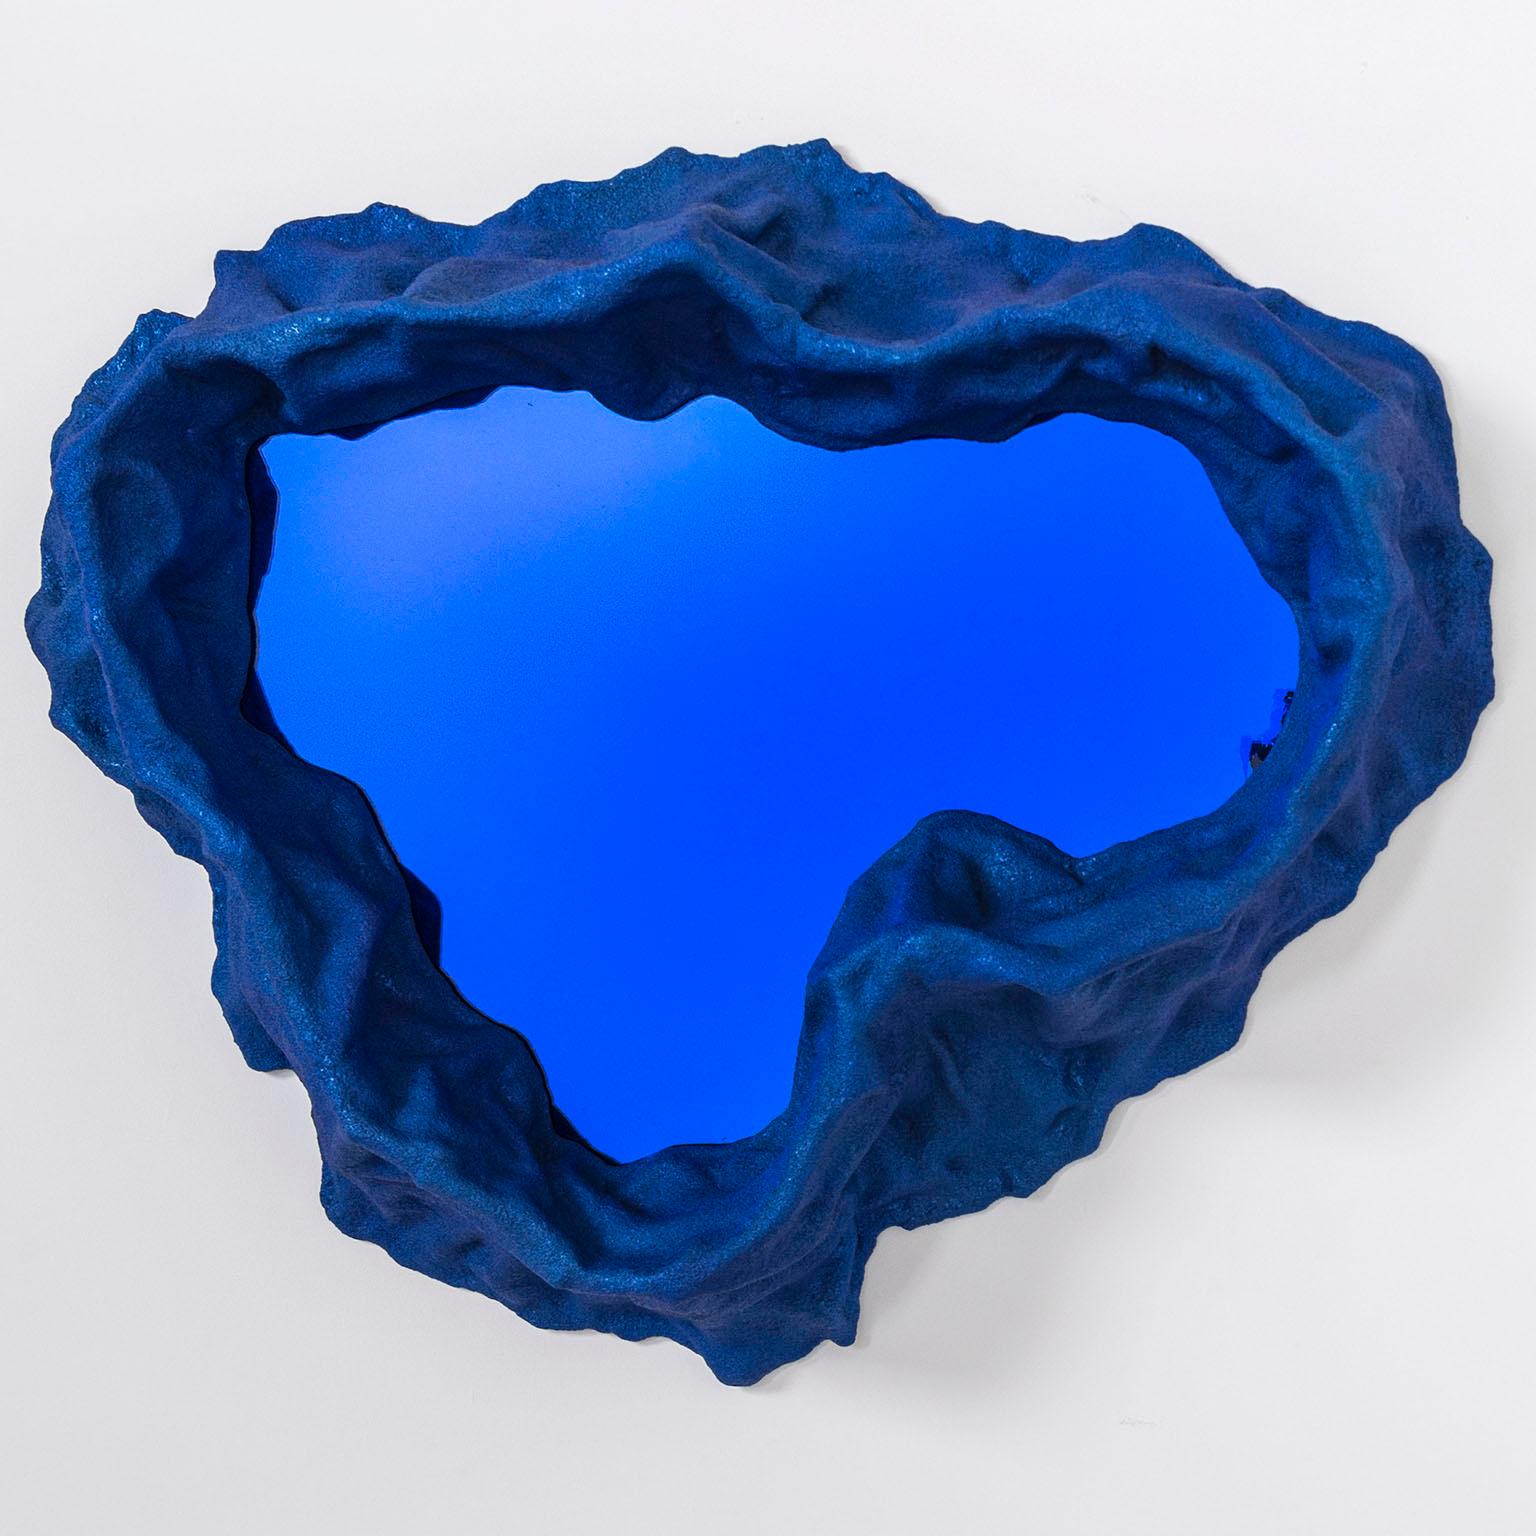 “Blue Spill (Sublime Viewfinder)” is Presented by Aaron Blendowski

The “Voyager” series by Aaron Blendowski deploys richly colorful objects meant to allure and transform the spaces they are placed into. At times unimaginable, other worldly or